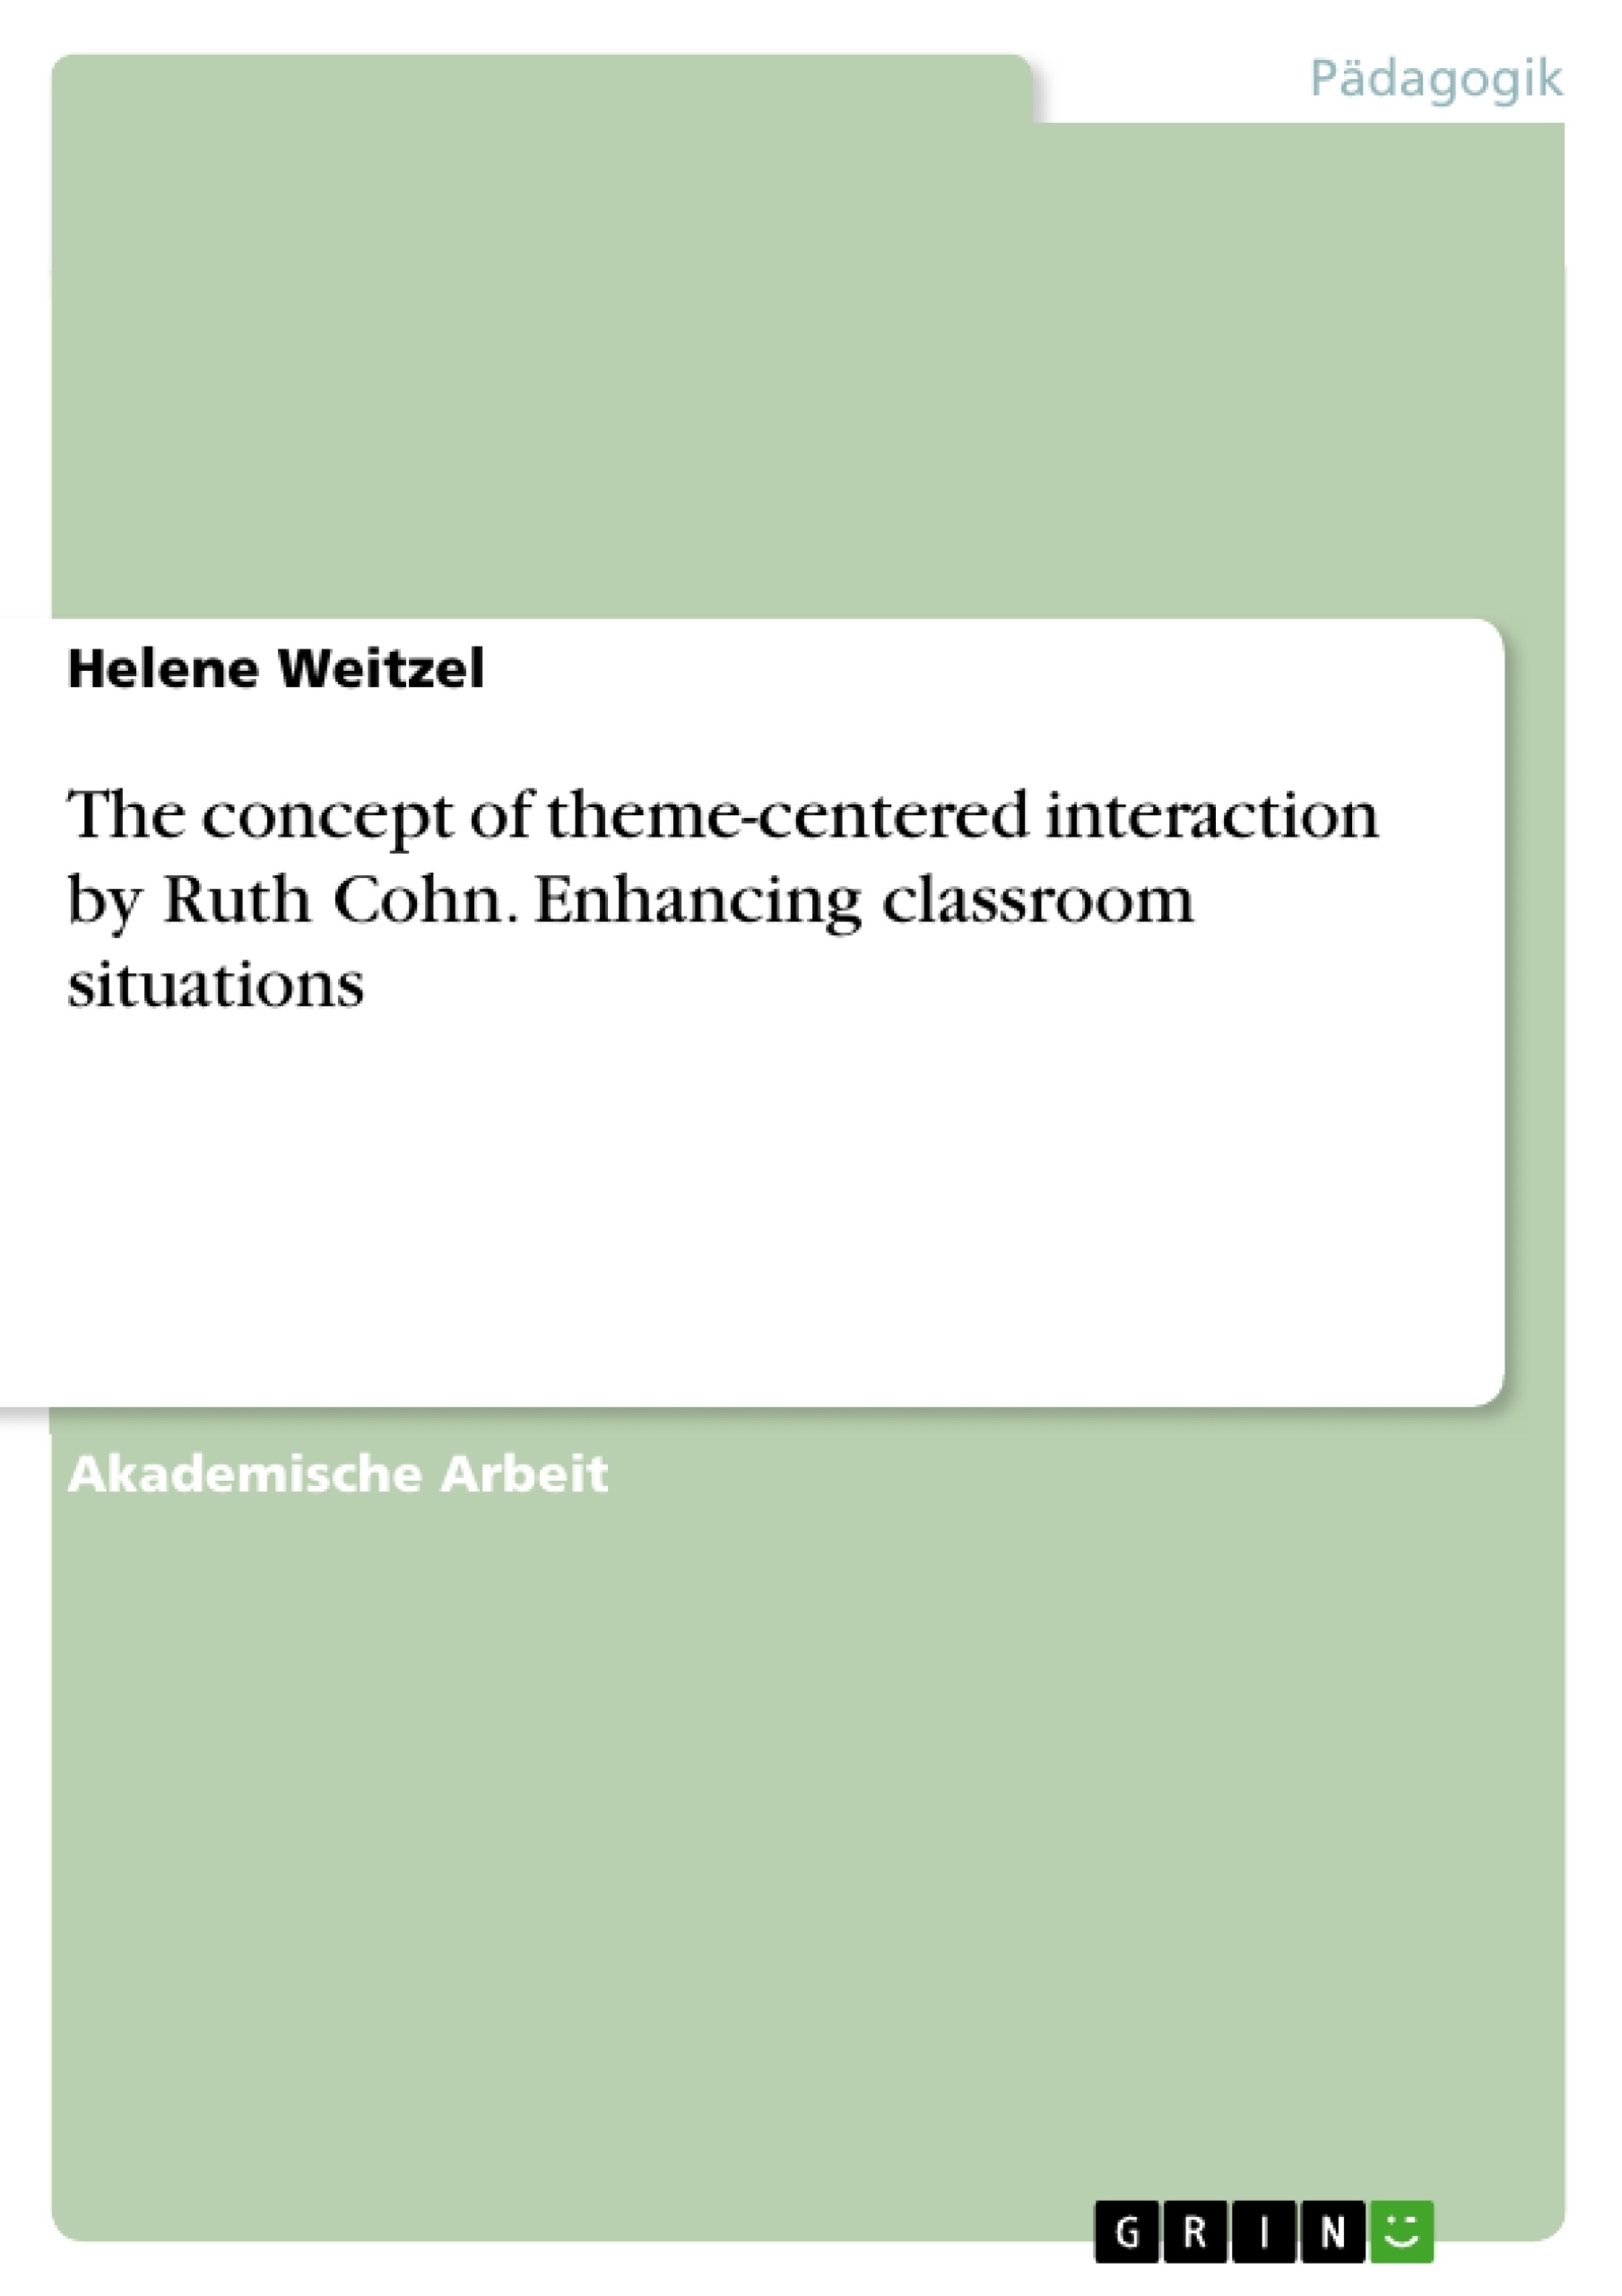 Título: The concept of theme-centered interaction by Ruth Cohn. Enhancing classroom situations